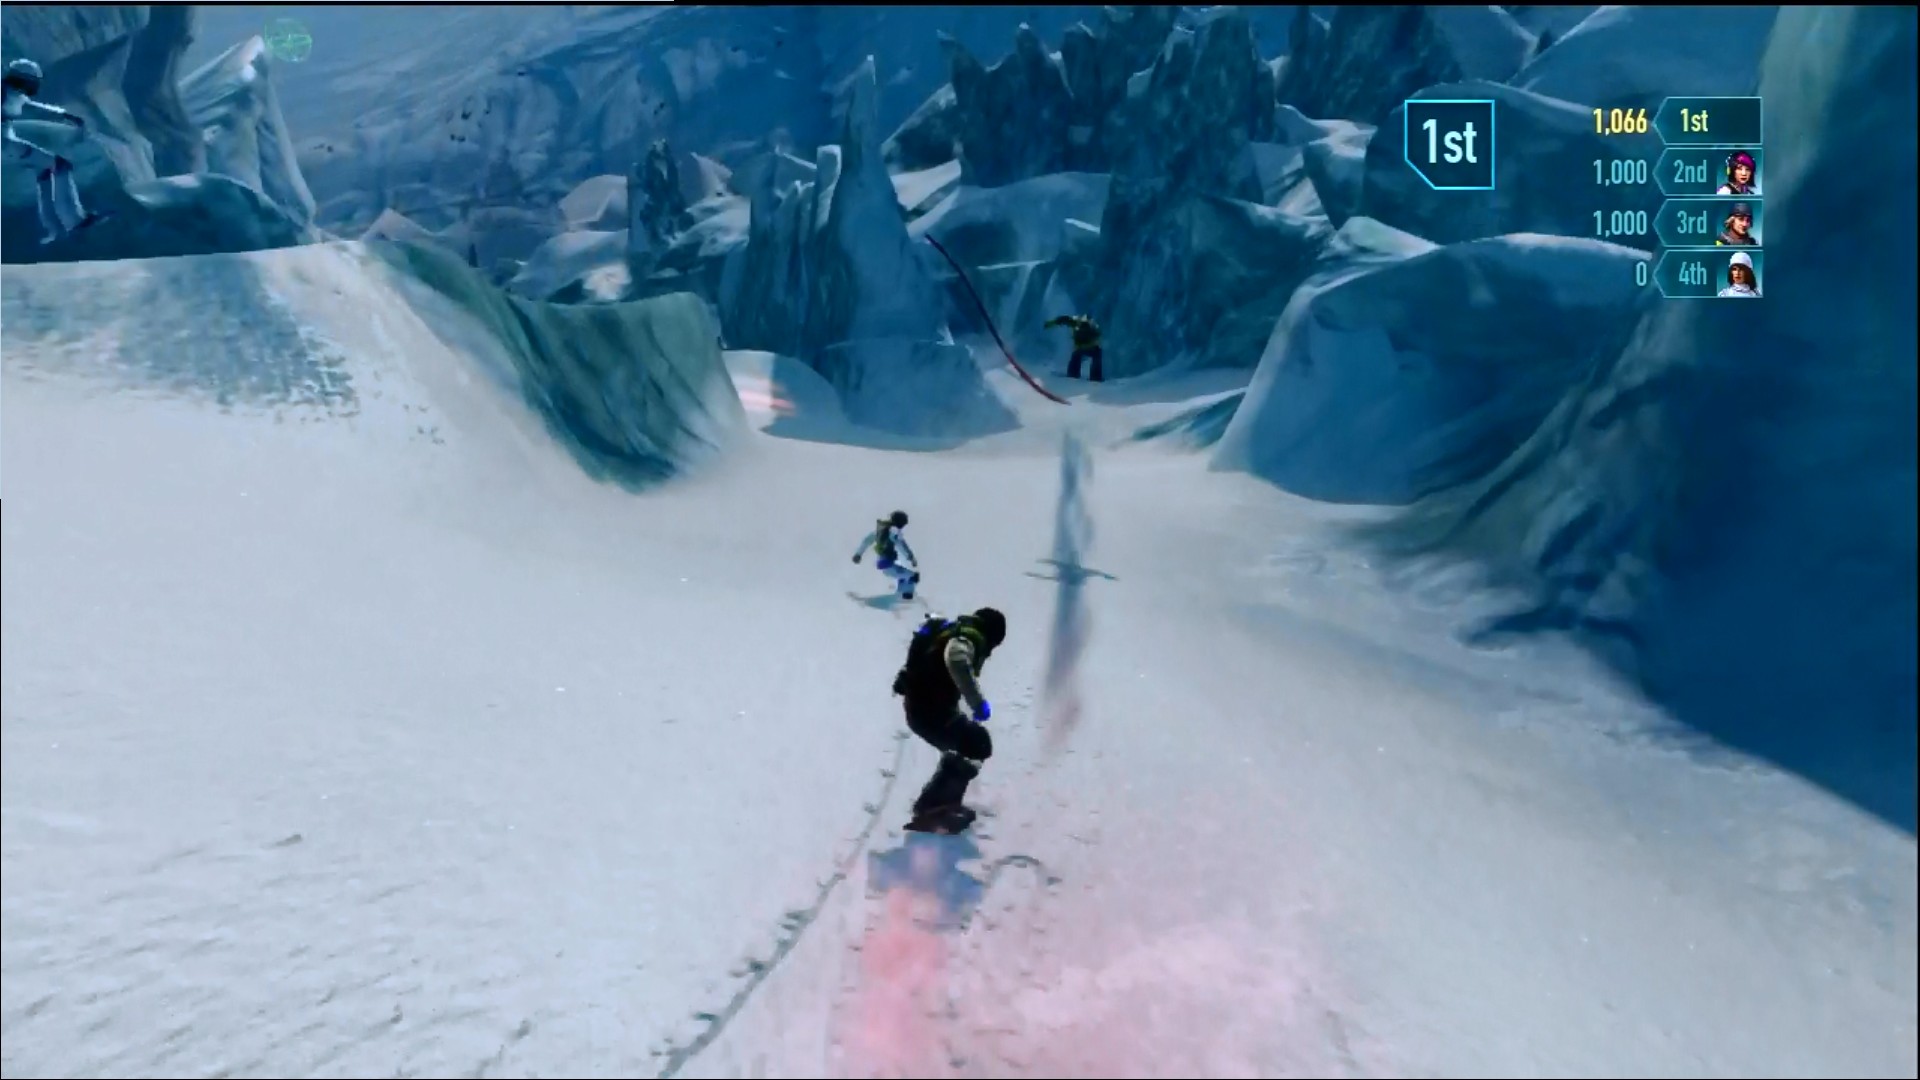 ssx snowboarding game